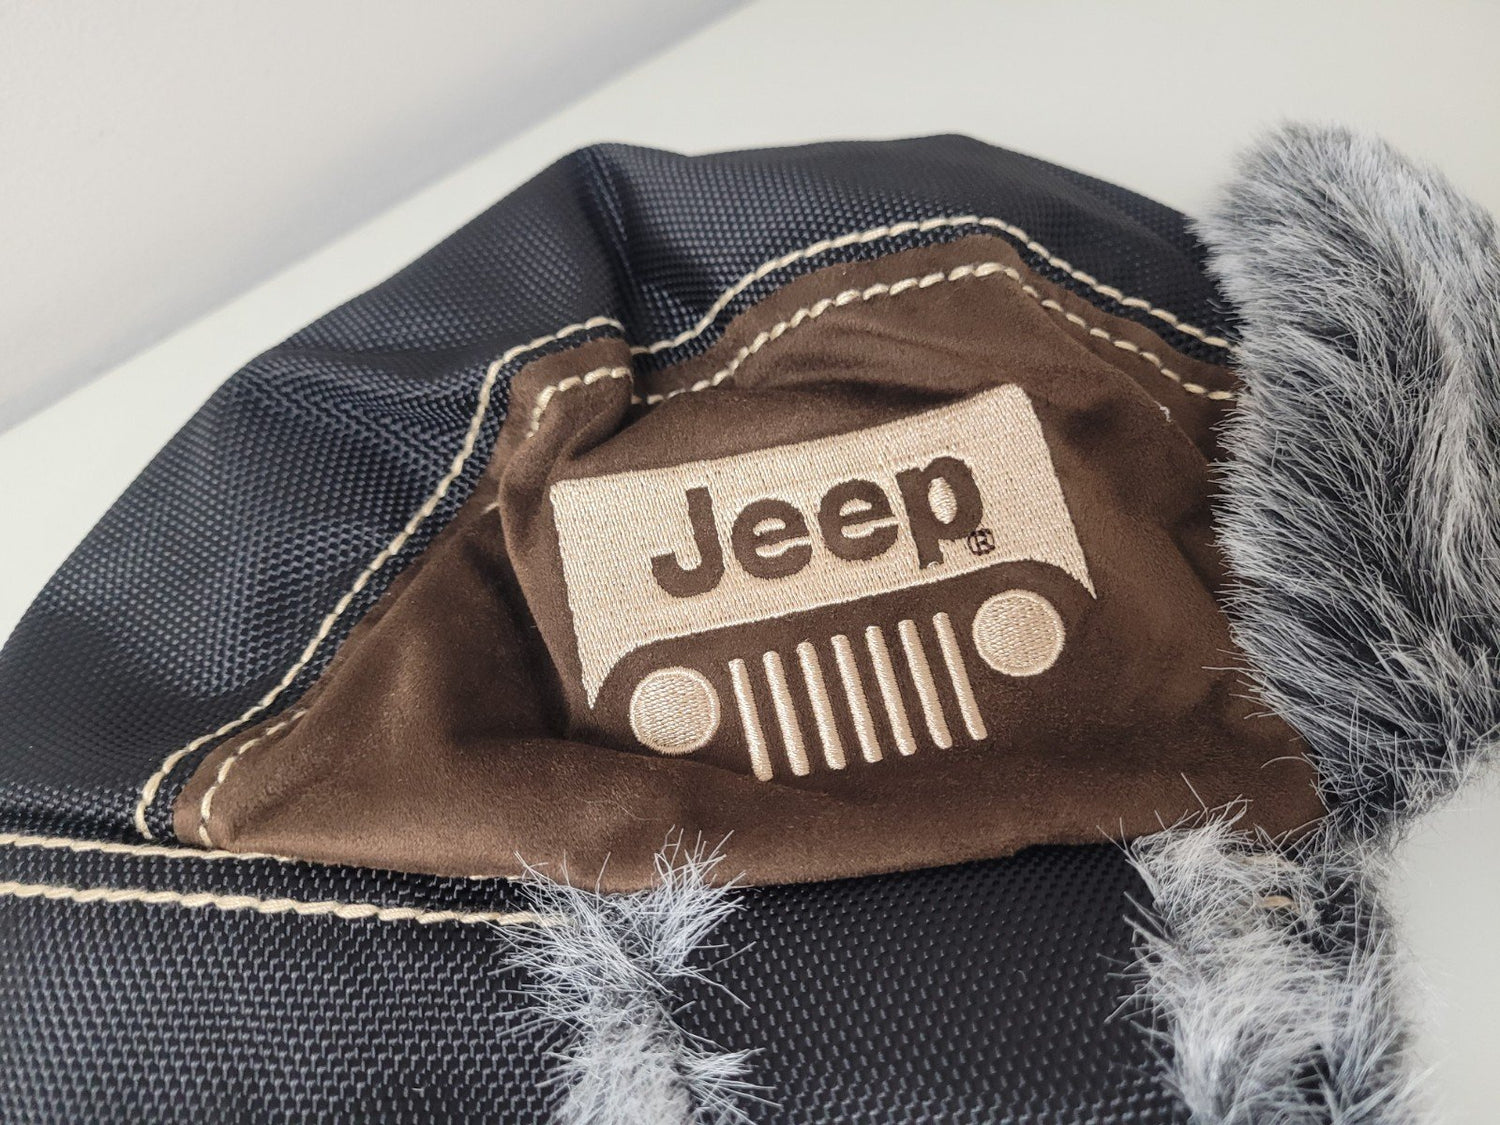 Leather Jeep Grill Trapper - Jeep Hats